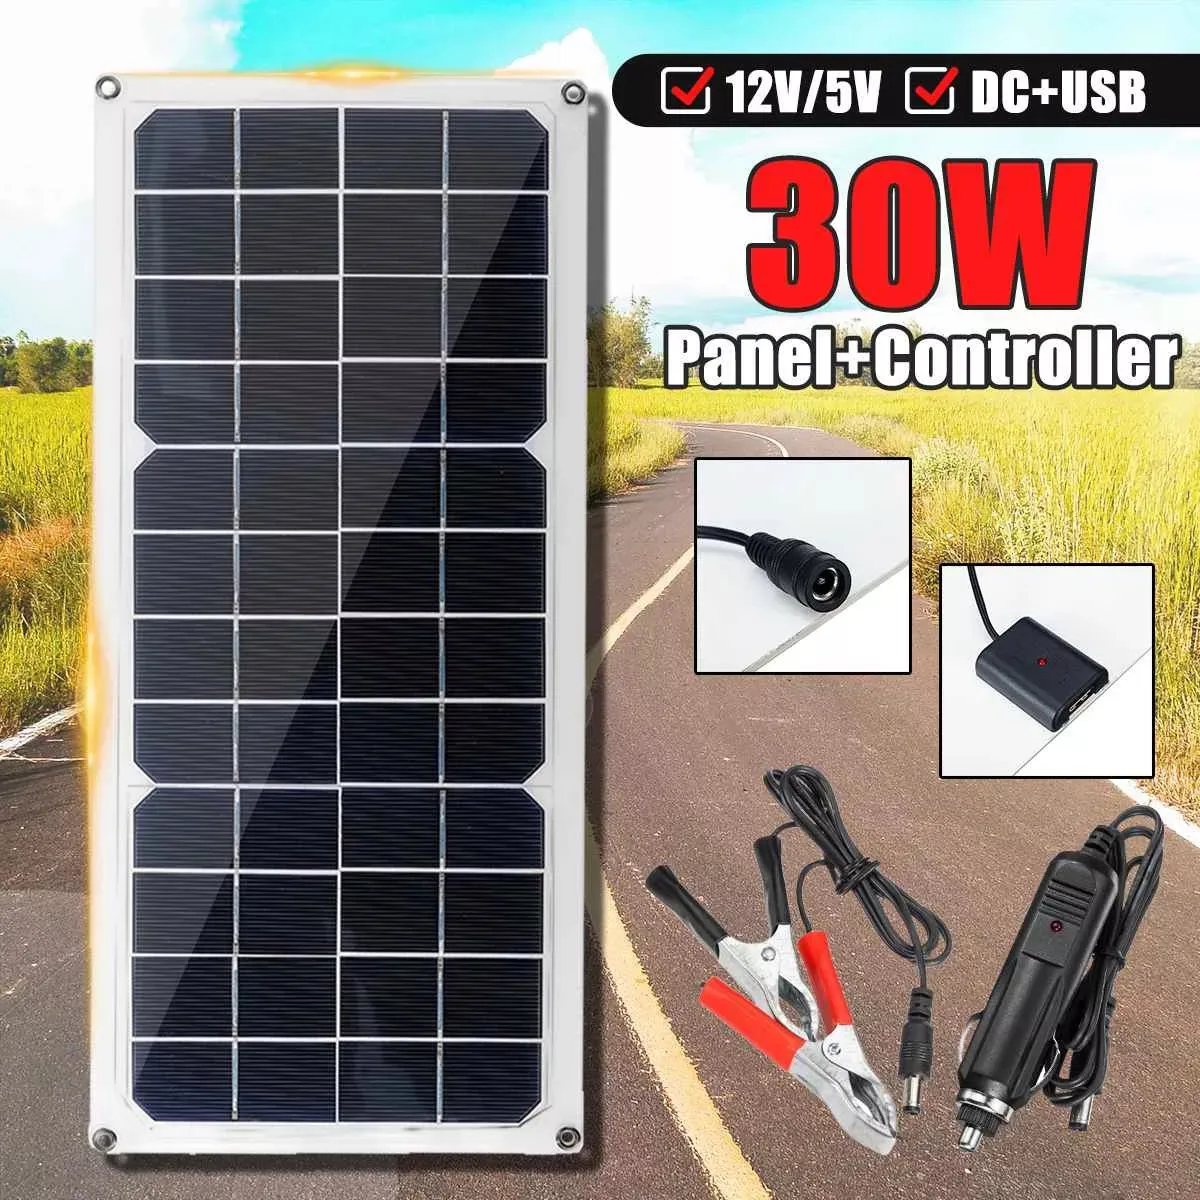 

NEW 30W Solar Panel 12V Polycrystalline USB Power Portable Outdoor Cycle Camping Hiking Travel Solar Cell Phone Charger kit